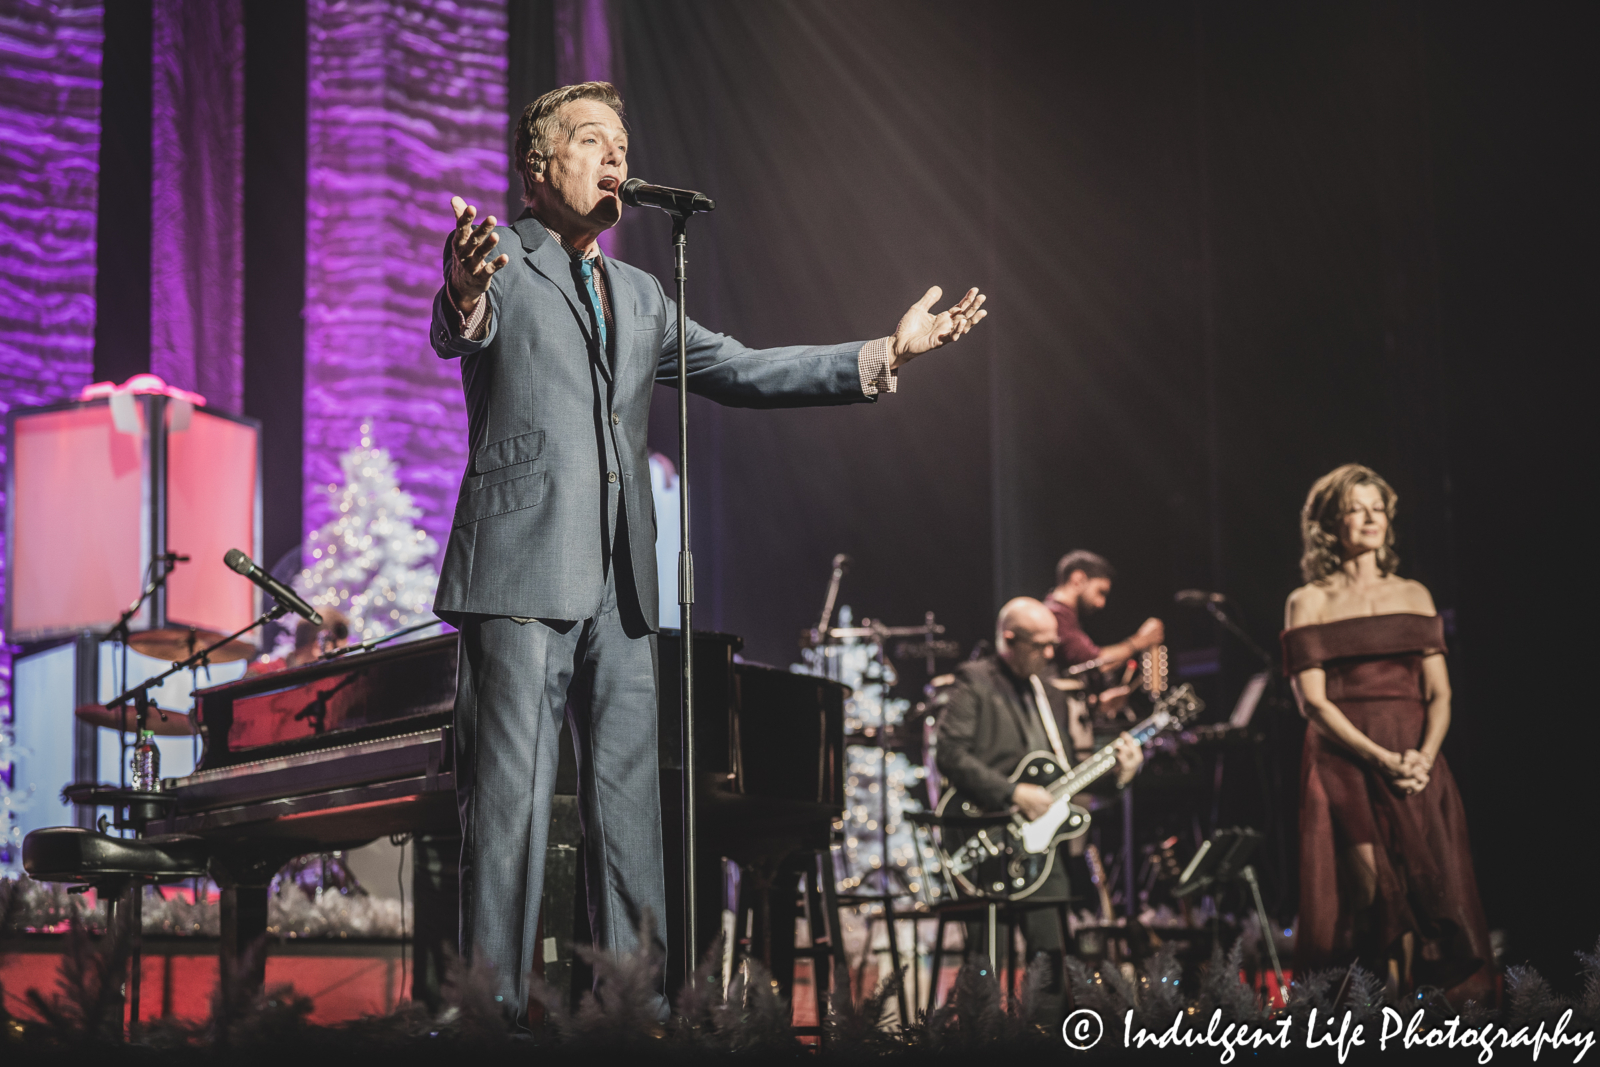 Michael W. Smith performing live with Amy Grant during their Christmas Live concert at Music Hall in downtown Kansa City, MO on November 30, 2023.